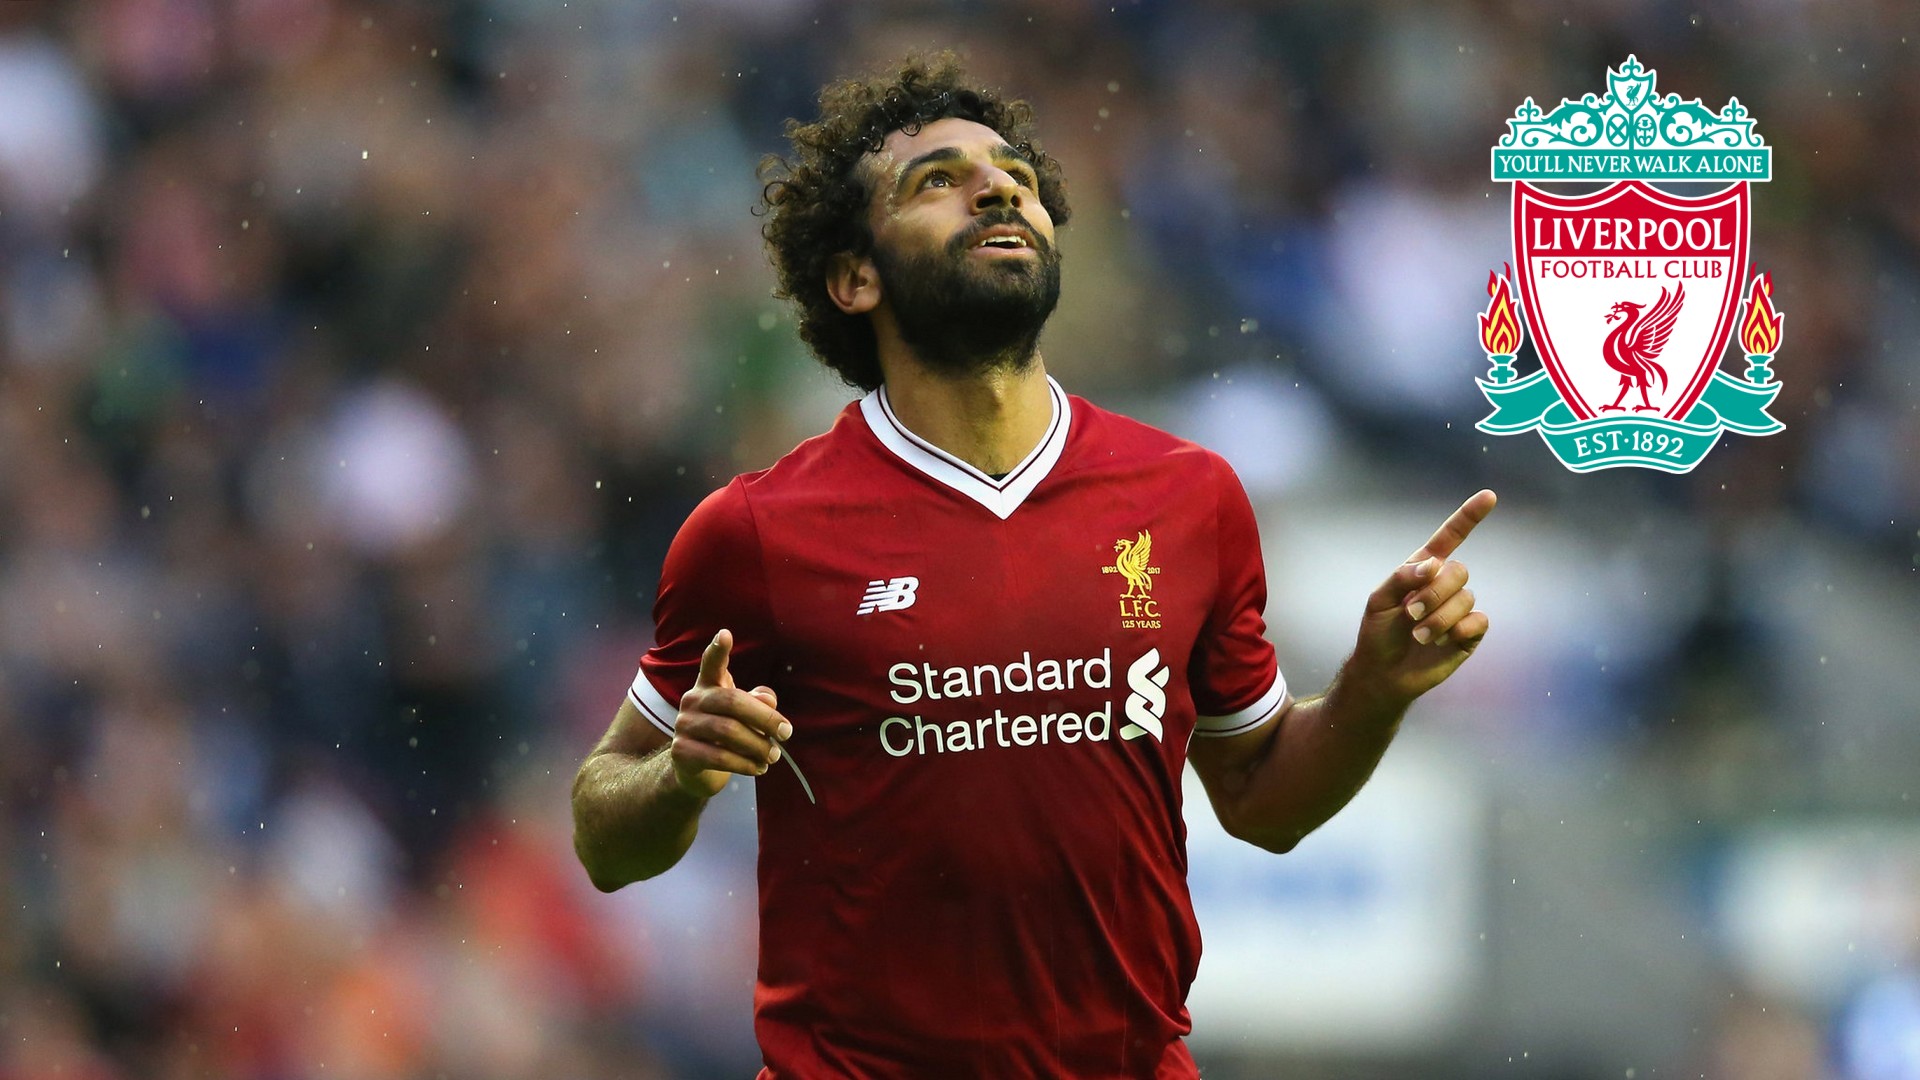 Liverpool Mohamed Salah HD Backgrounds With Resolution 1920X1080 pixel. You can make this wallpaper for your Desktop Computer Backgrounds, Mac Wallpapers, Android Lock screen or iPhone Screensavers